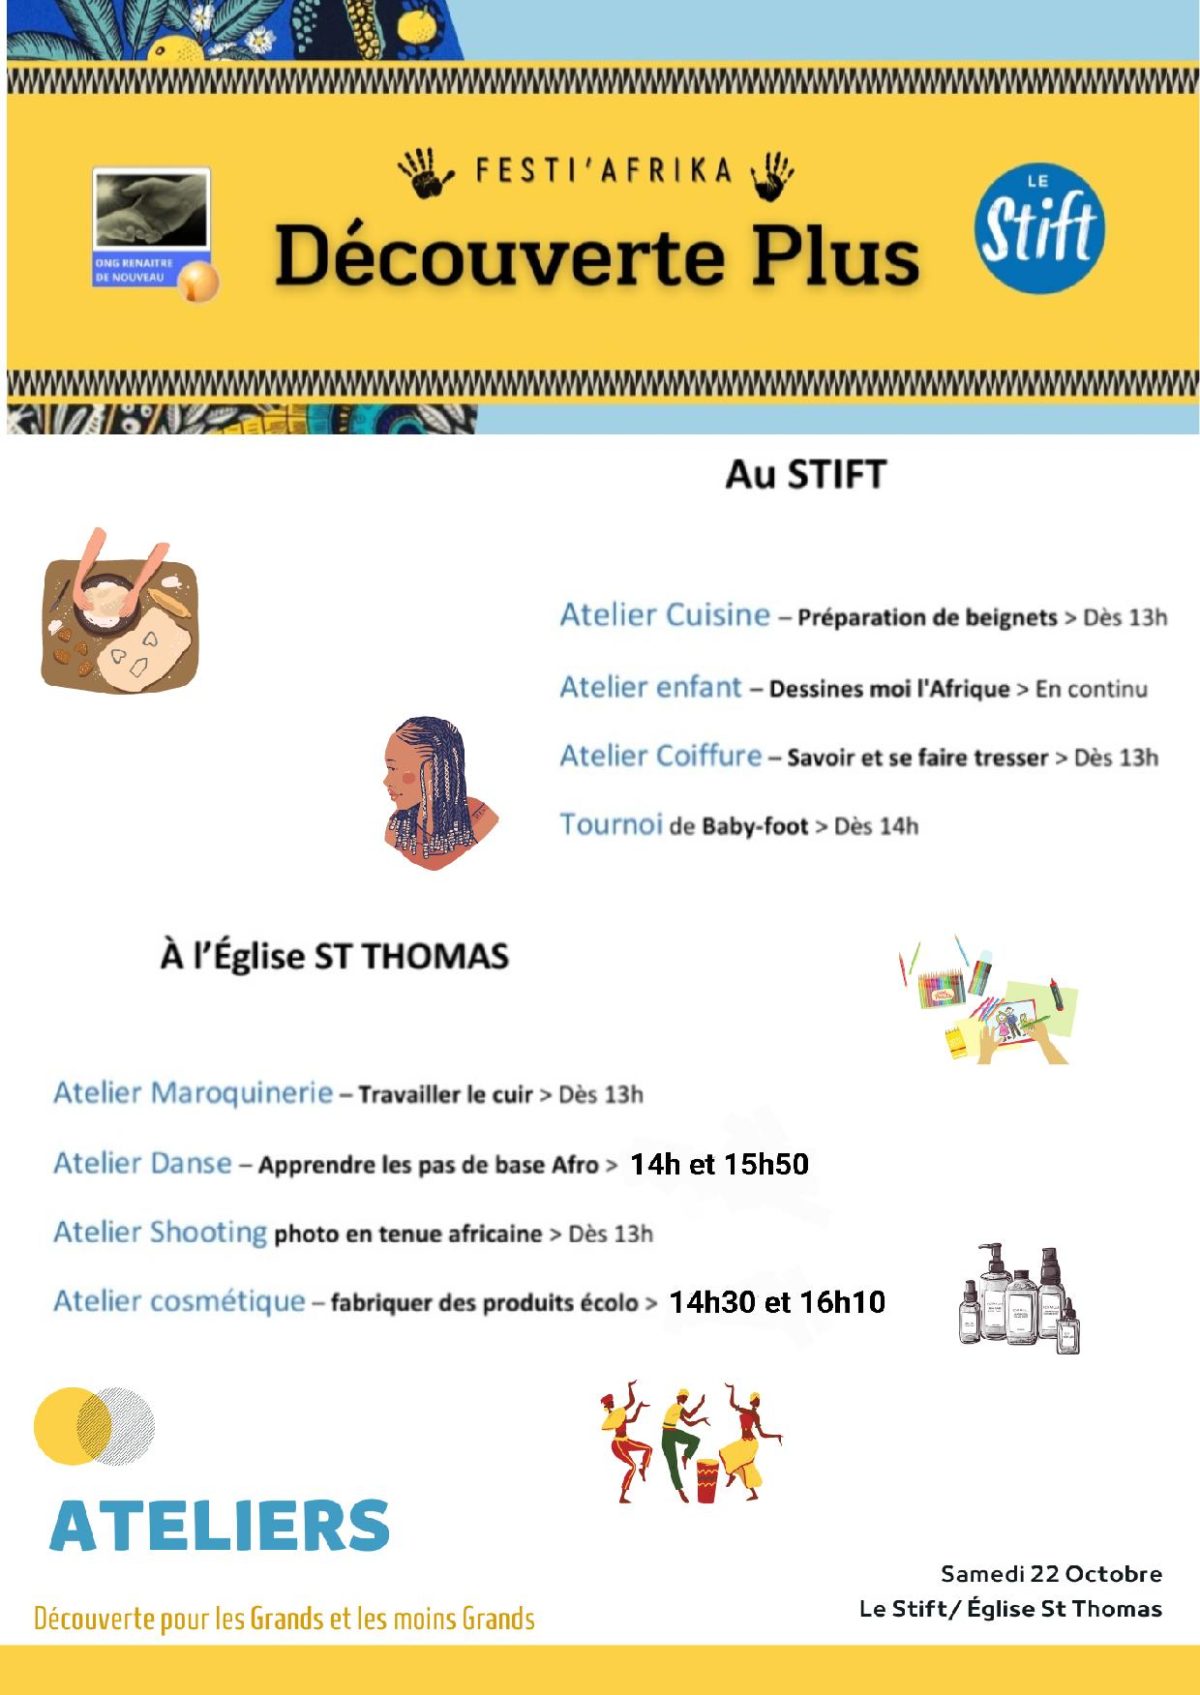 Ateliers-page-001